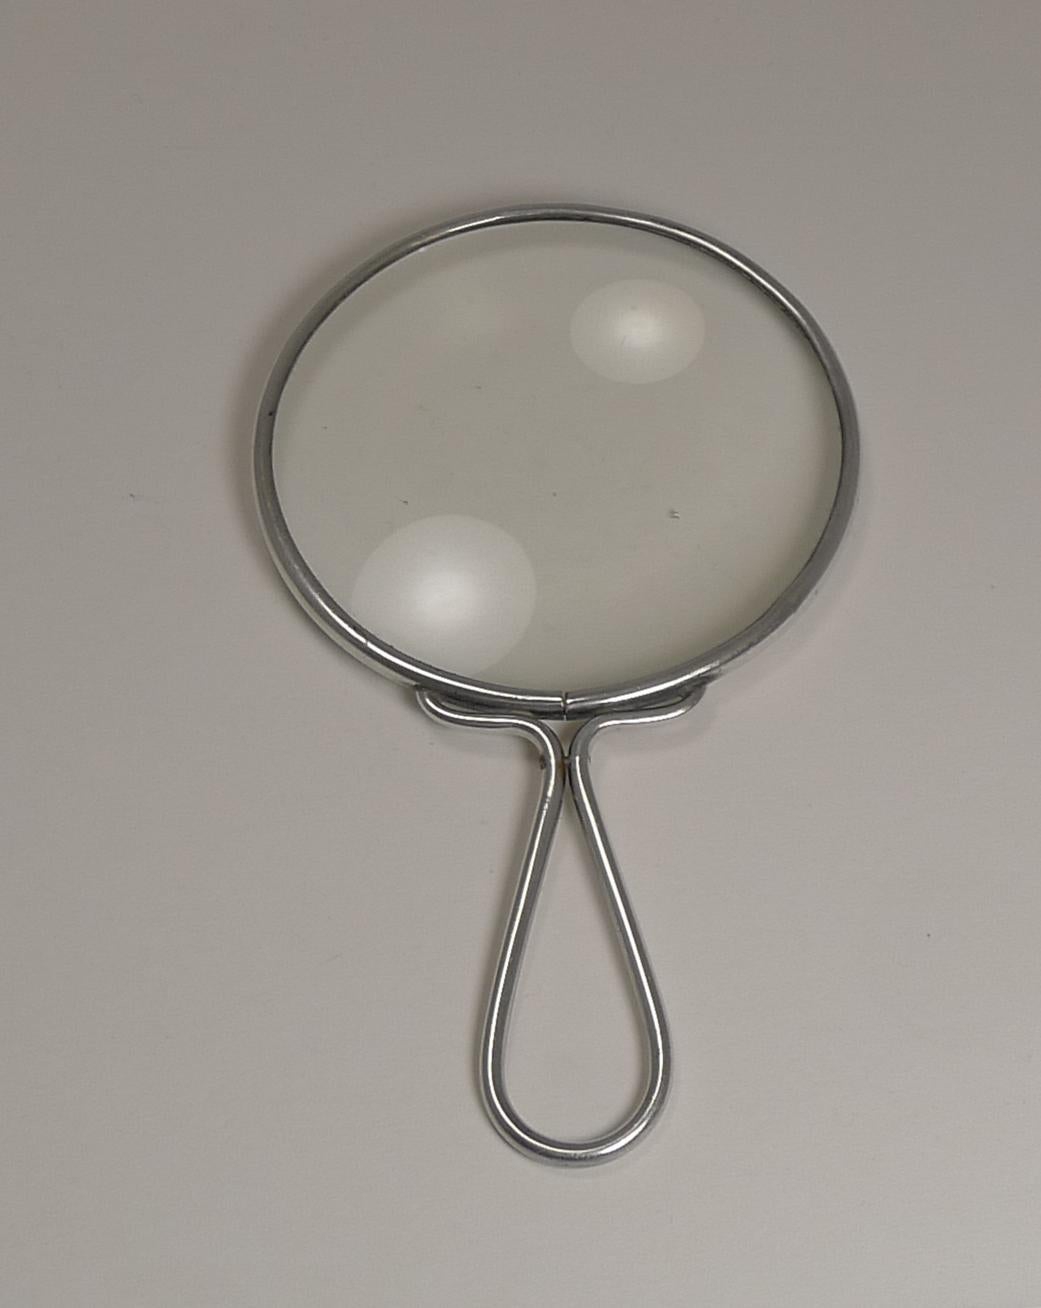 A wonderful large desk magnifying glass by the highly sought-after and collectable silversmith, Sampson Mordan and Co. Ltd.; fully hallmarked for London 1925.

The frame around the magnifier and the handle are all sterling silver. The glass is the